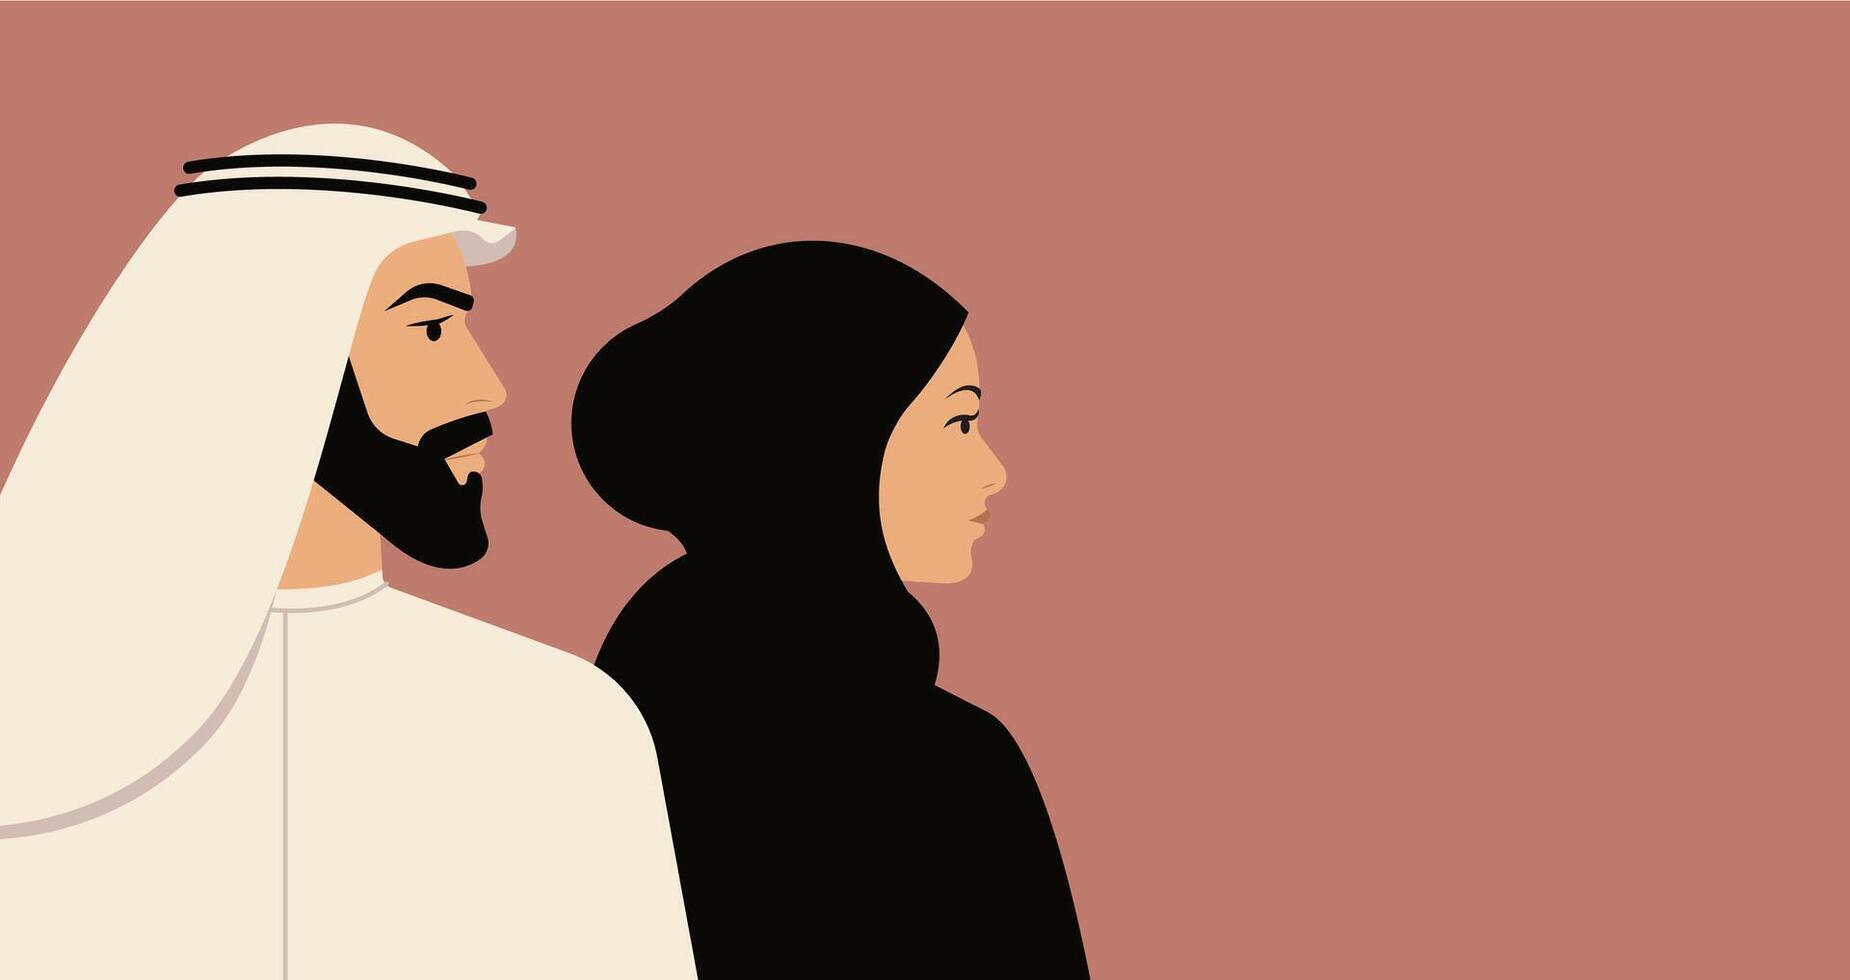 Muslim man and woman profiles. Head and chest view. Looking same direction. Headdress and traditional culture clothing. Horizontal composition. Middle East people portraits. vector